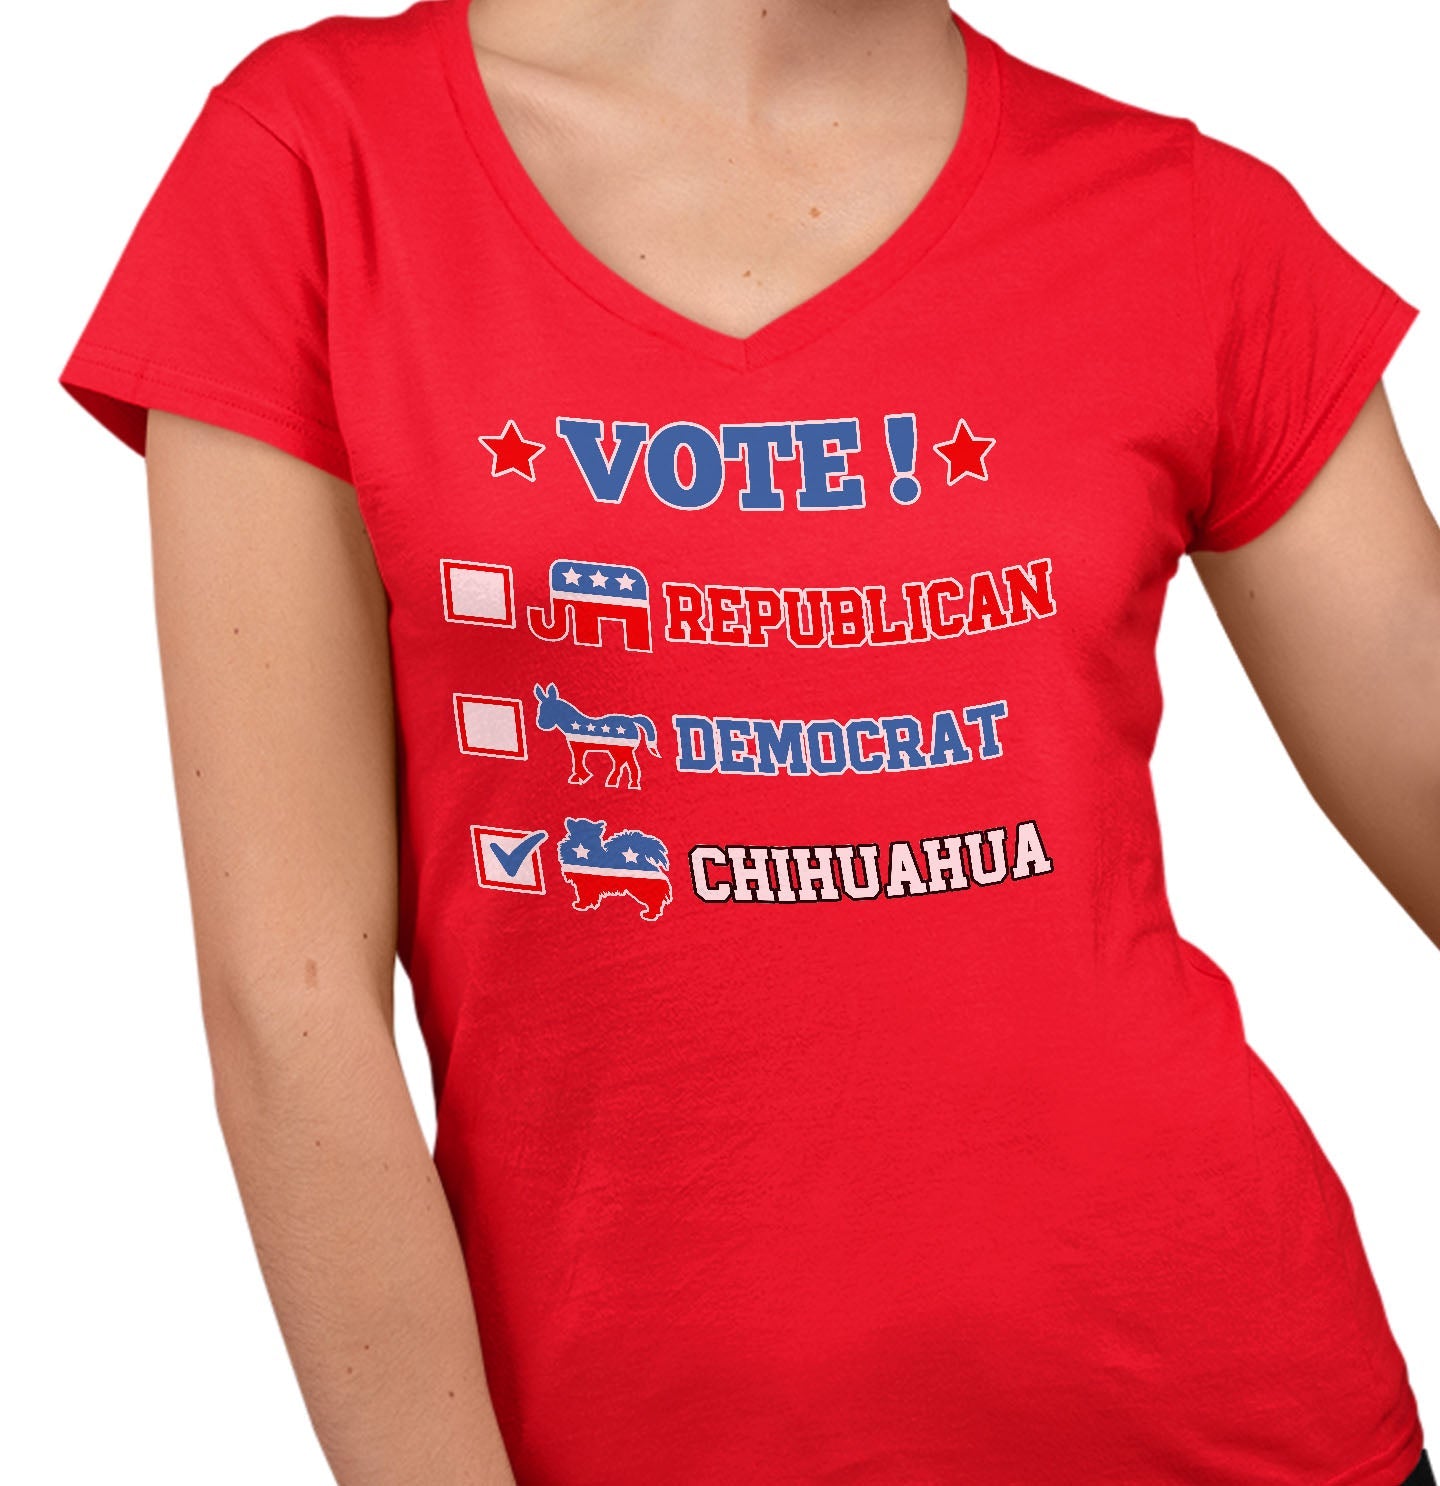 Vote for the Chihuahua (Long-Haired) - Women's V-Neck T-Shirt